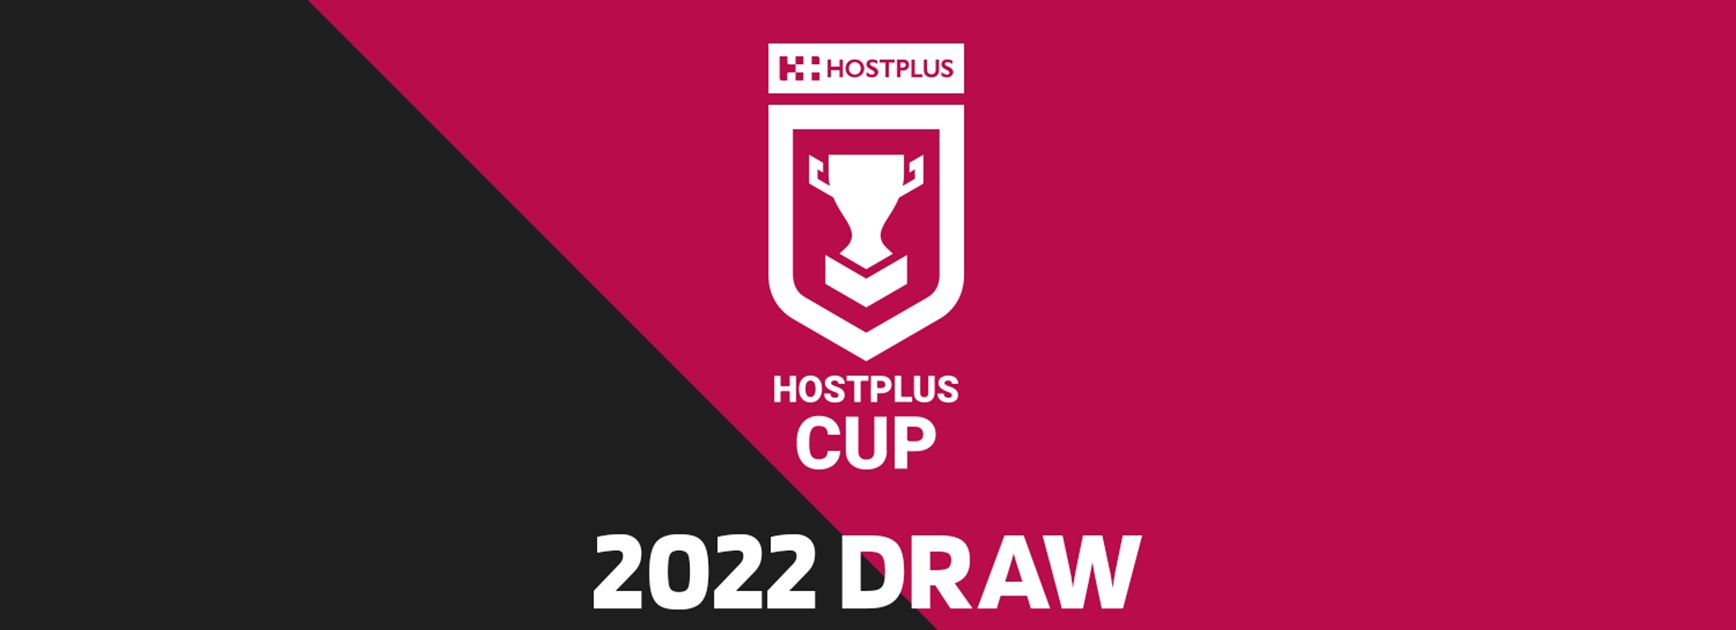 QRL release 2022 Hostplus Cup draw